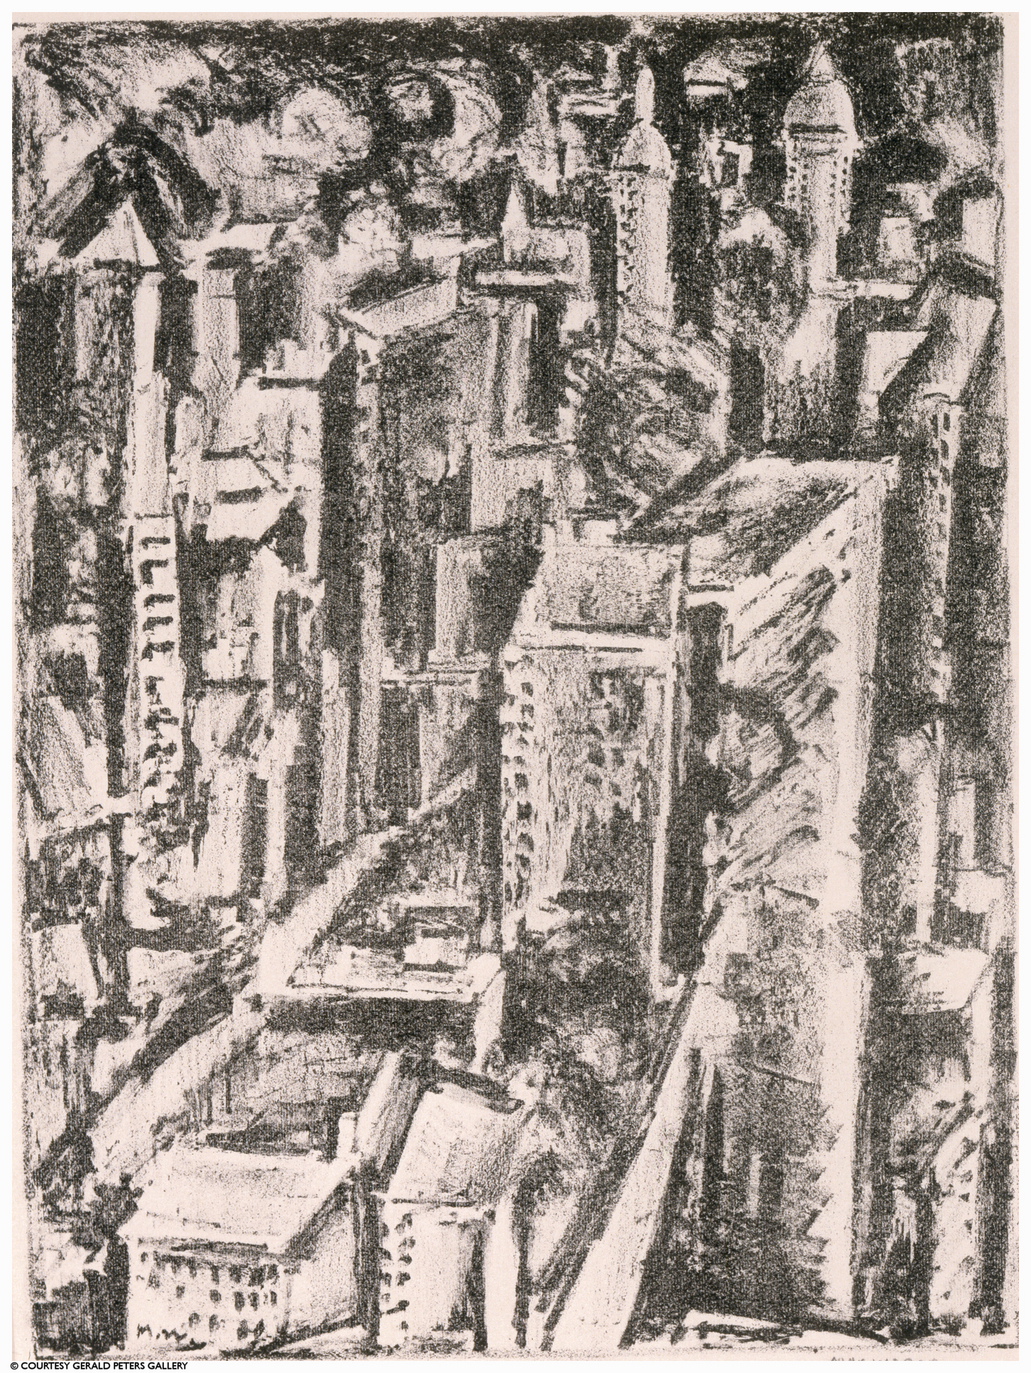 
							

									Max Weber									New York 1928-29									Lithograph, 9 1/4 x 6 7/8 inches									


							